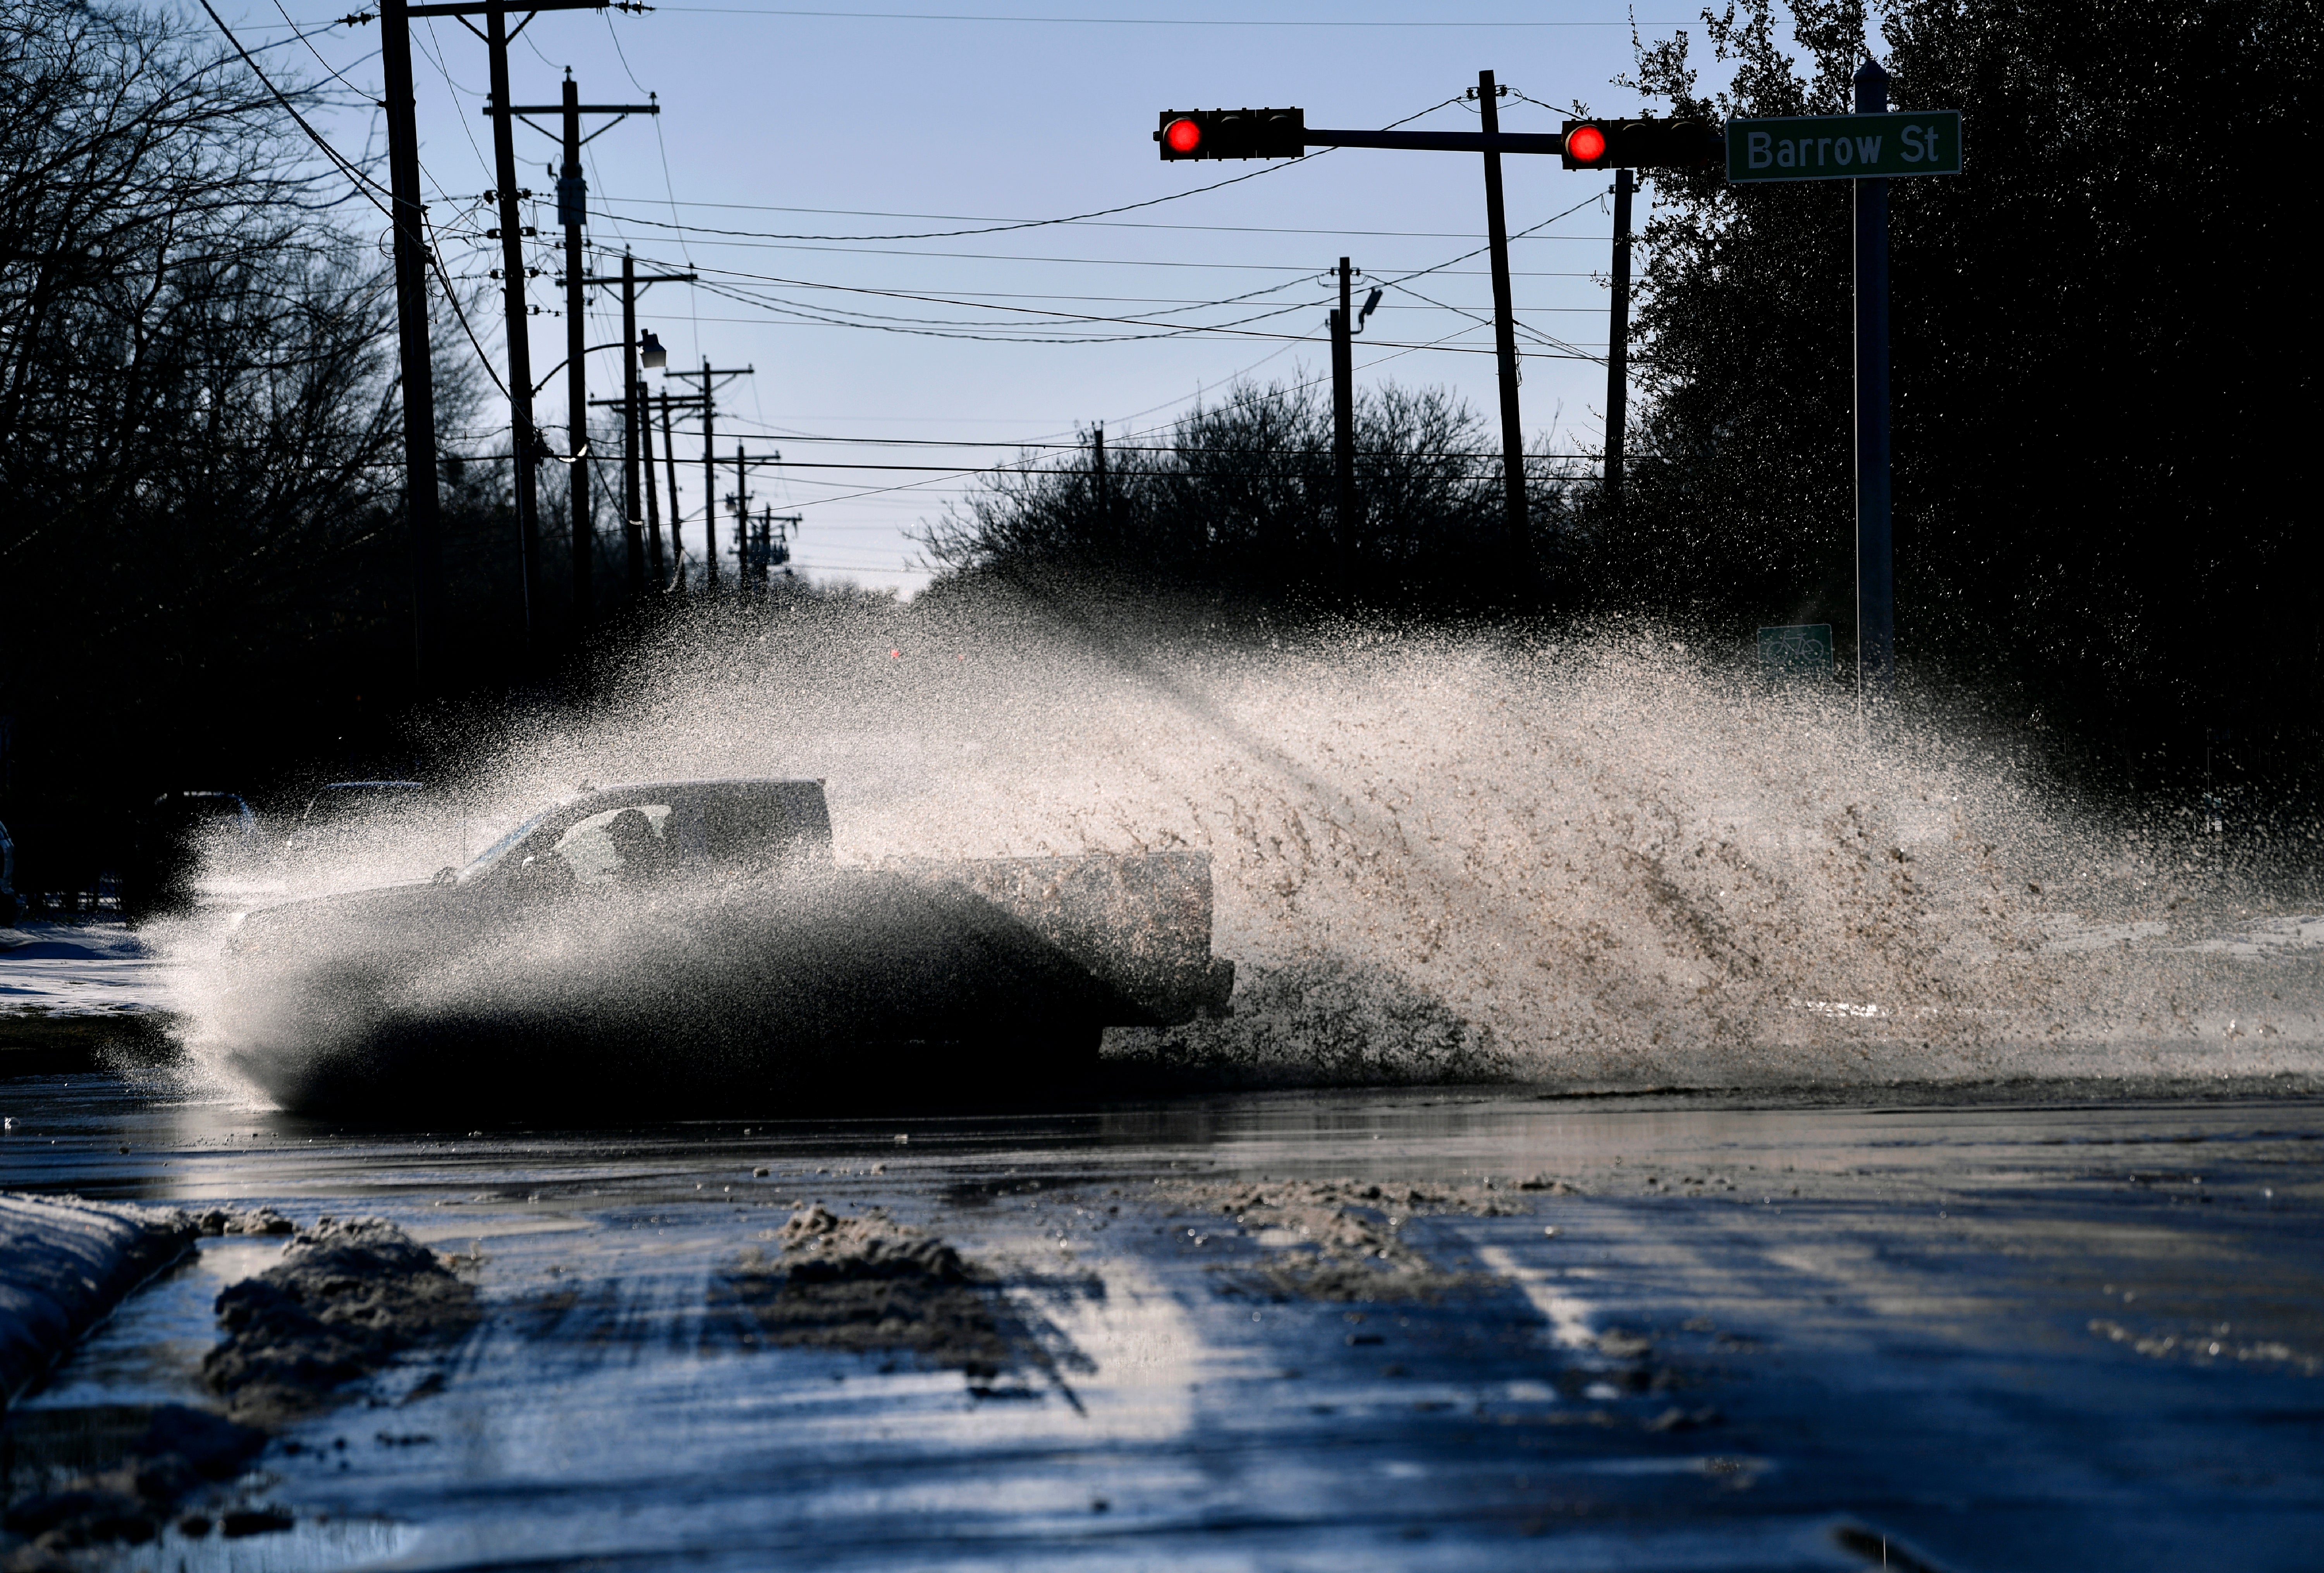 A pickup sends a wake of snow melt high into the air as the driver plows through a large puddle at Barrow and South 11th streets intersection in Abilene, Texas